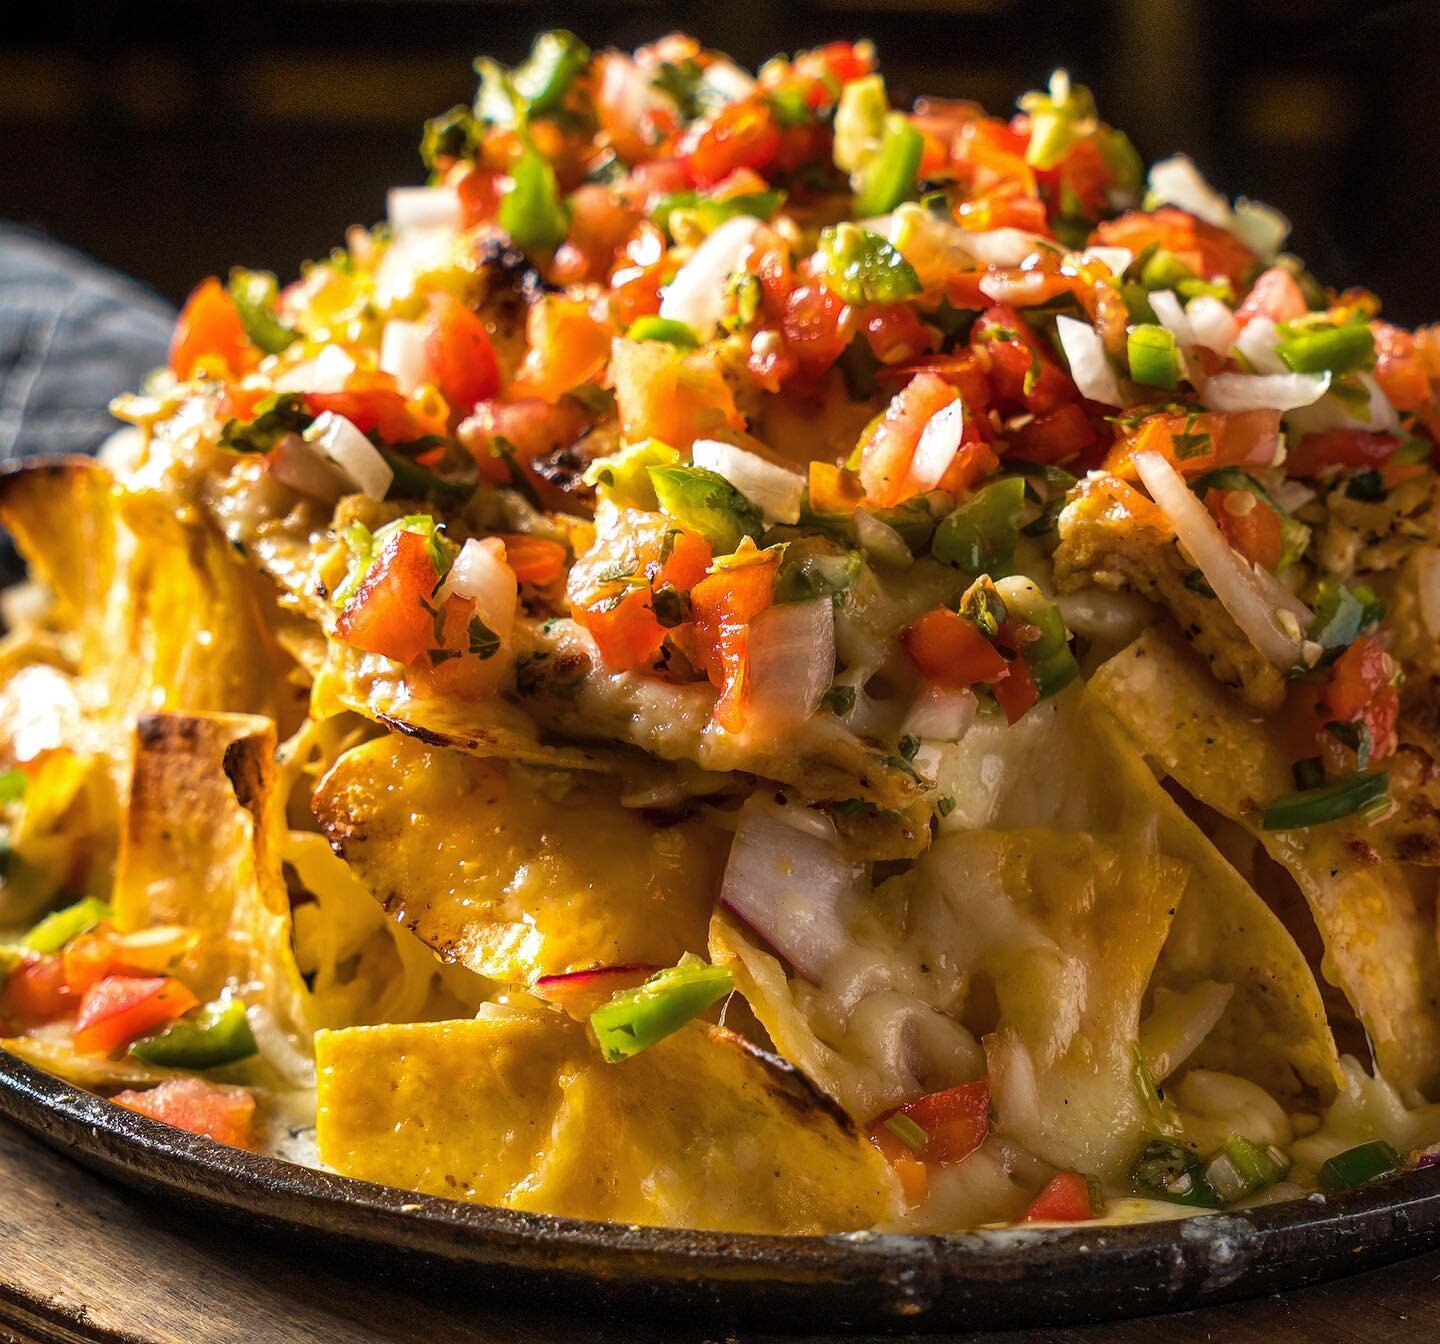 🔥 Nacho average appetizer at Coalhouse! Feast on our famous BBQ nachos, piled high with all your favorite fixings! 🧀🌶️ #coalhousestamford #stamfordct #bbqnachos #cheddar #montereyjack #pepperjack #pickledonions #texascornchips #brisketbeans #jalap